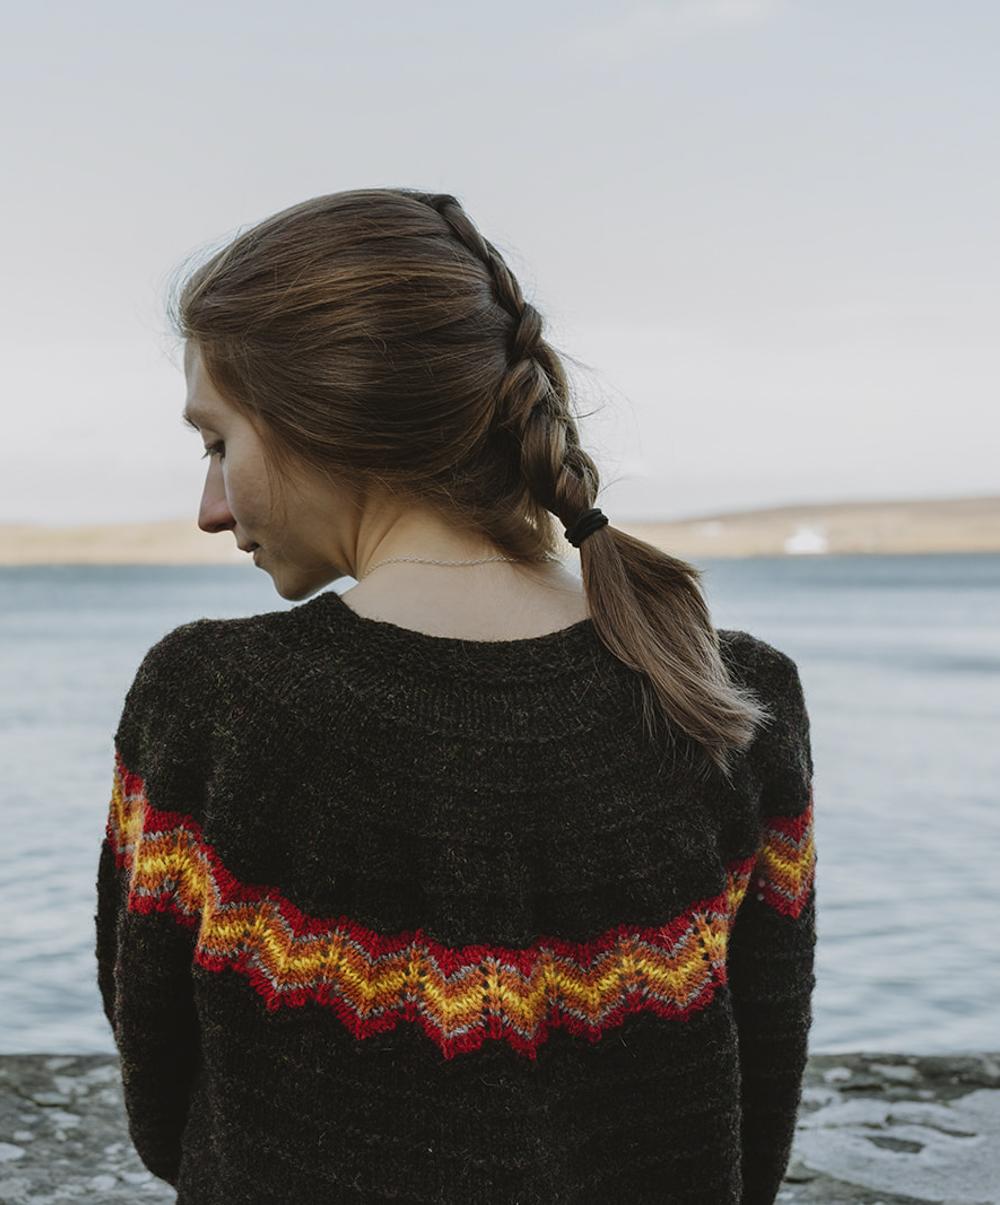 A woman with red hair stares out to sea while wearing a black gansey (sweater) with a striking fire-inspired yoke detail - Up Helly Aa gansey by Susan Molloy